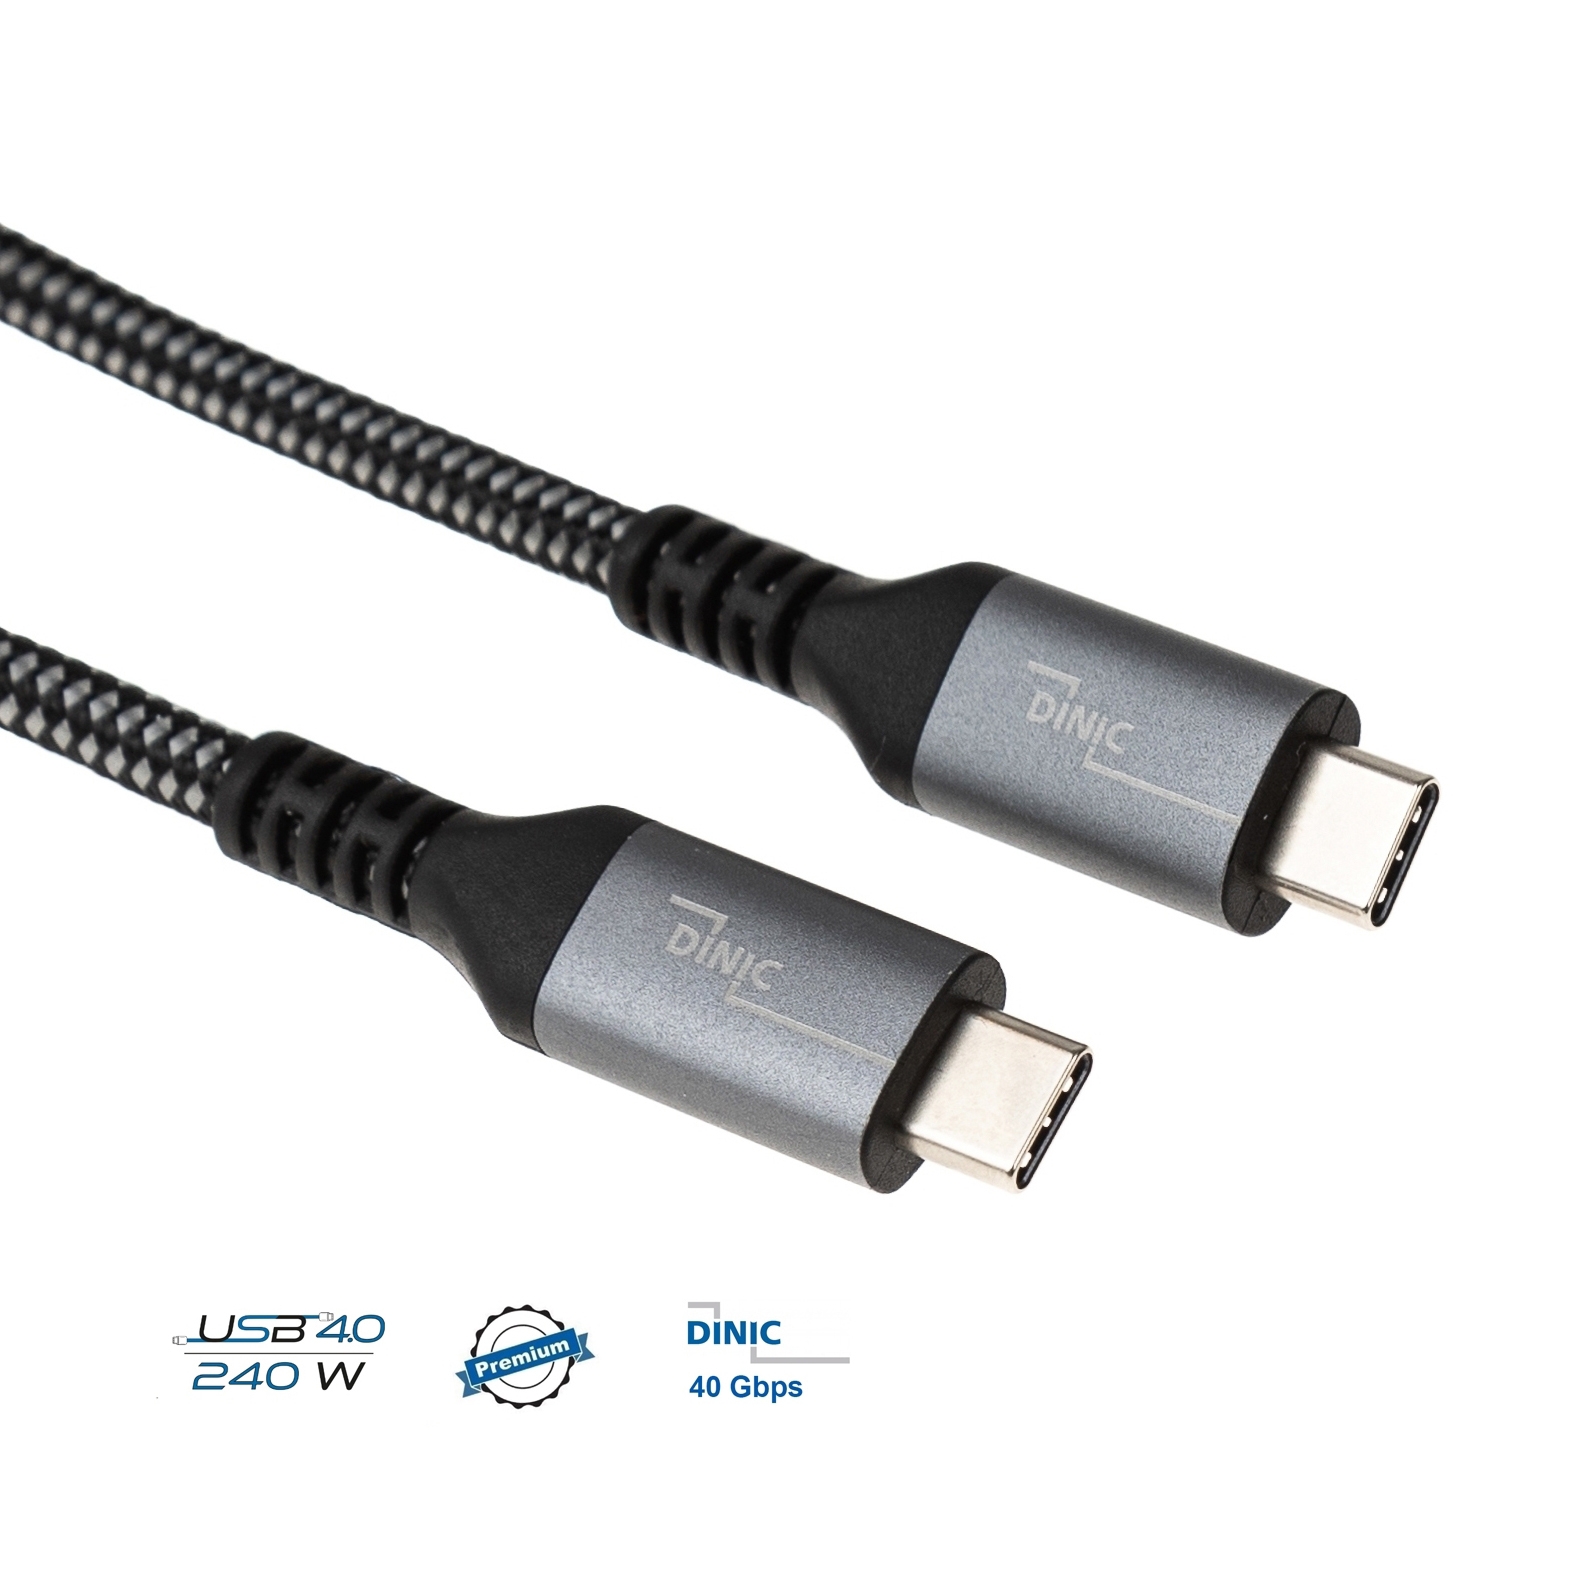 USB 4.0 cable, 2x Type-C™ male, 40 Gbps, 240 watts, 8K, 1m